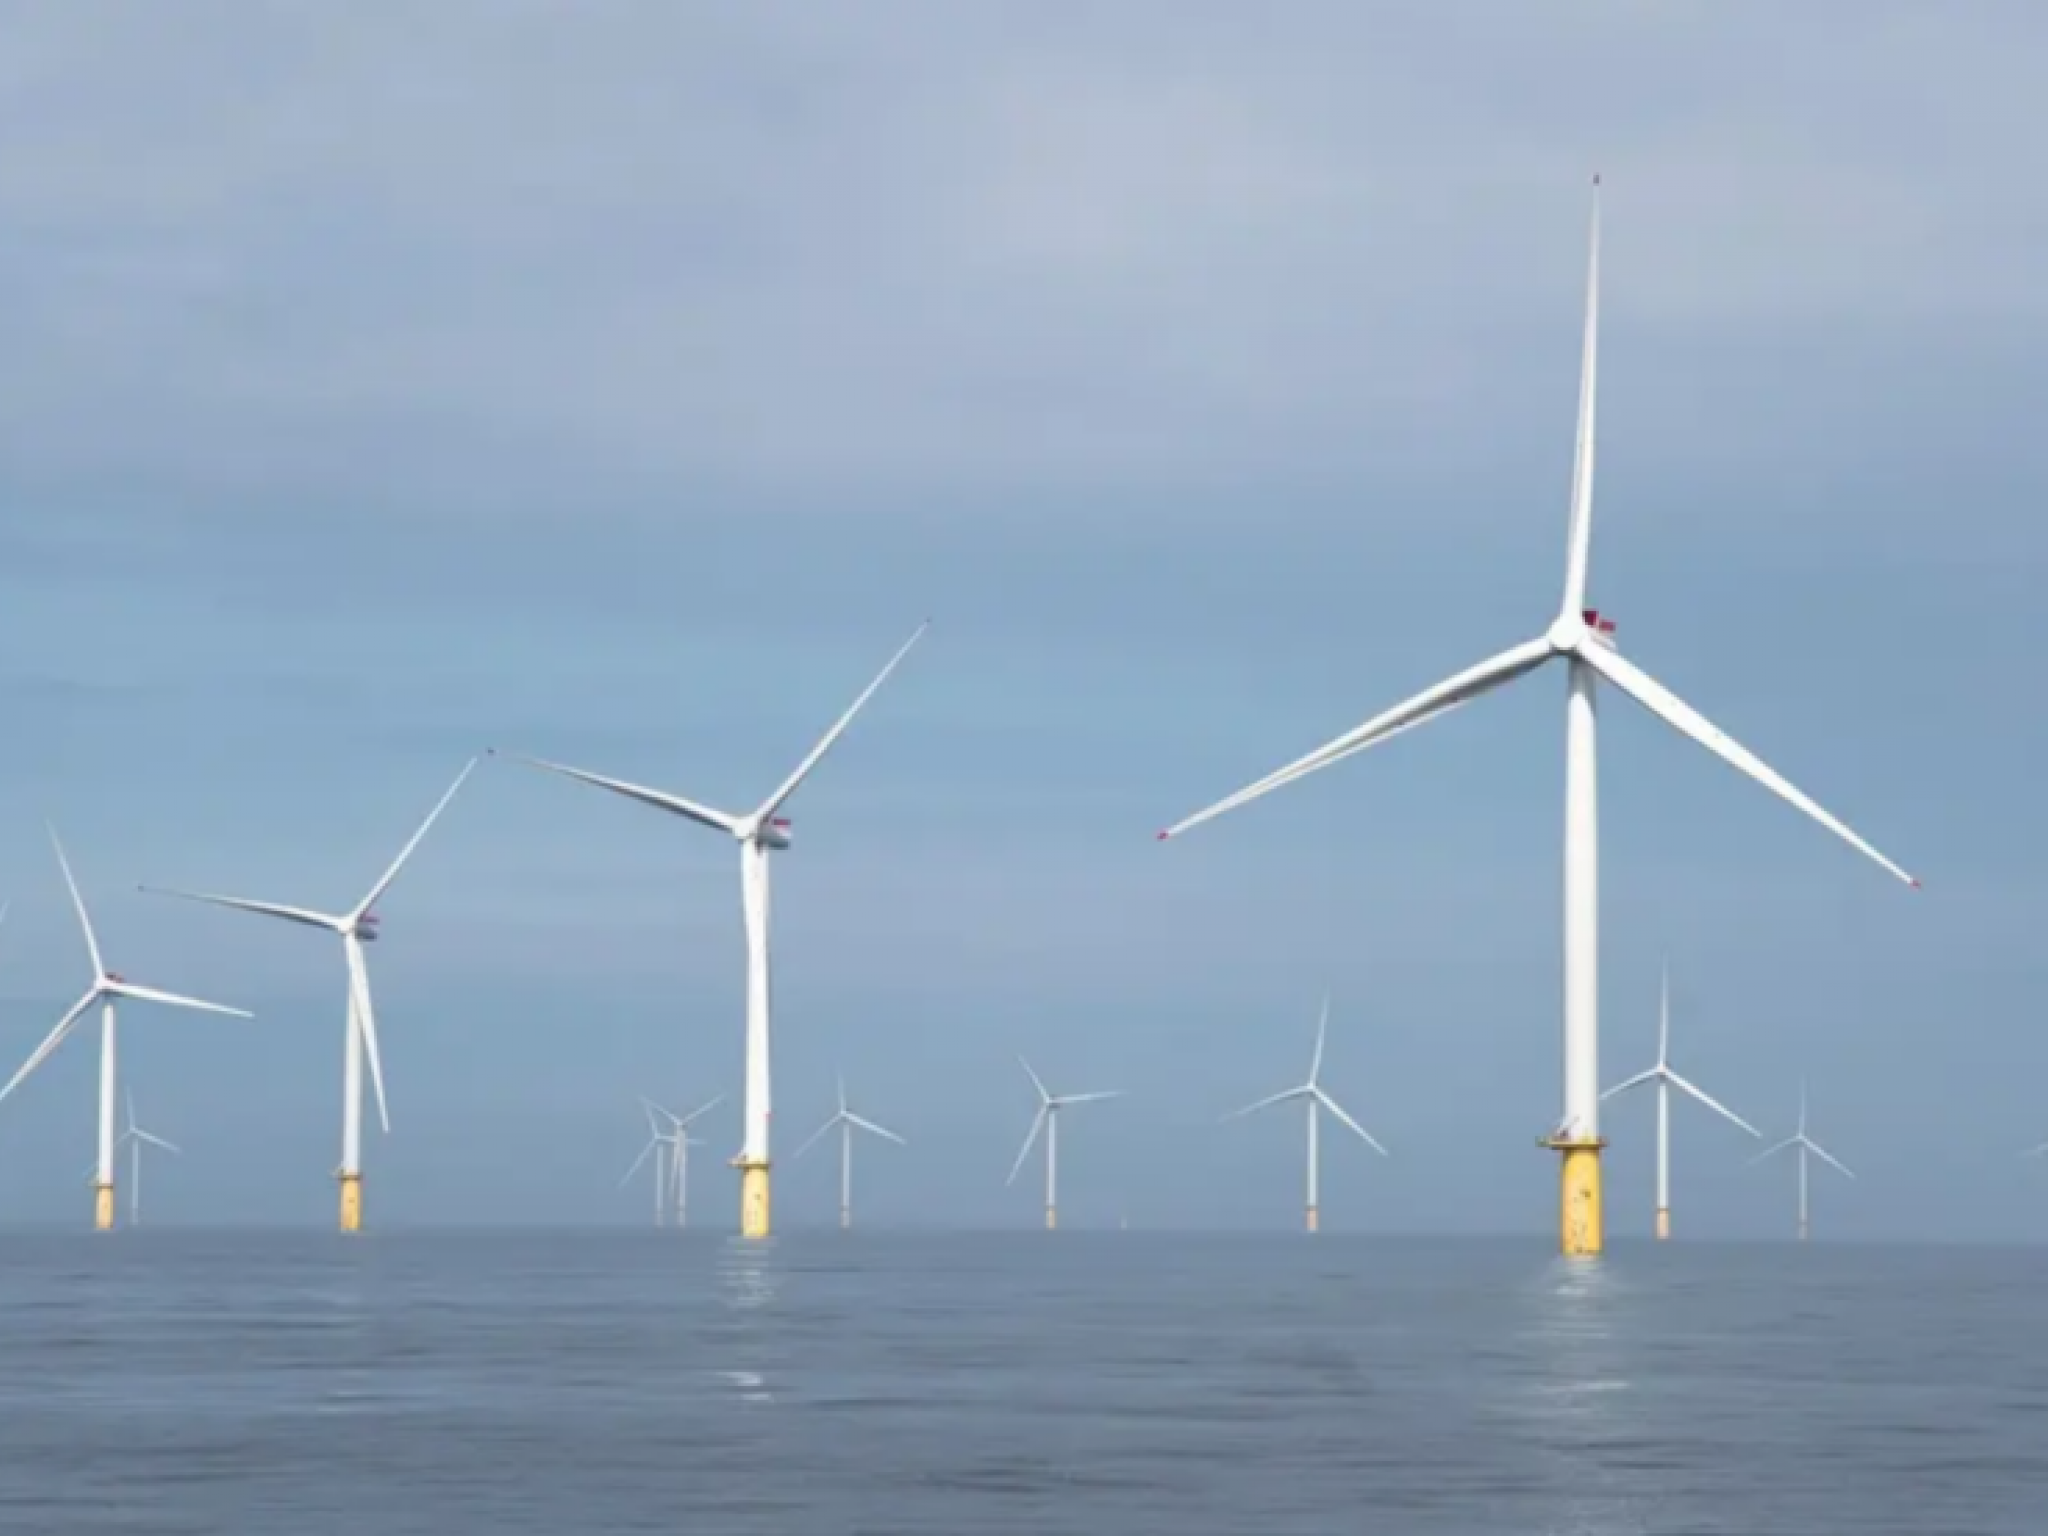  equinor-executes-offtake-agreement-for-empire-wind-1-details 